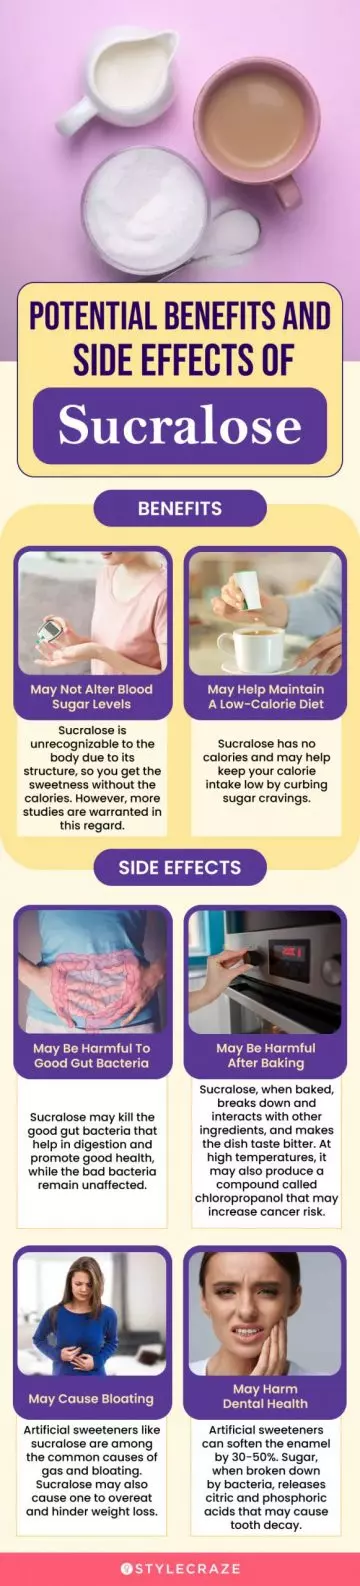 potential benefits and side effects of sucralose (infographic)